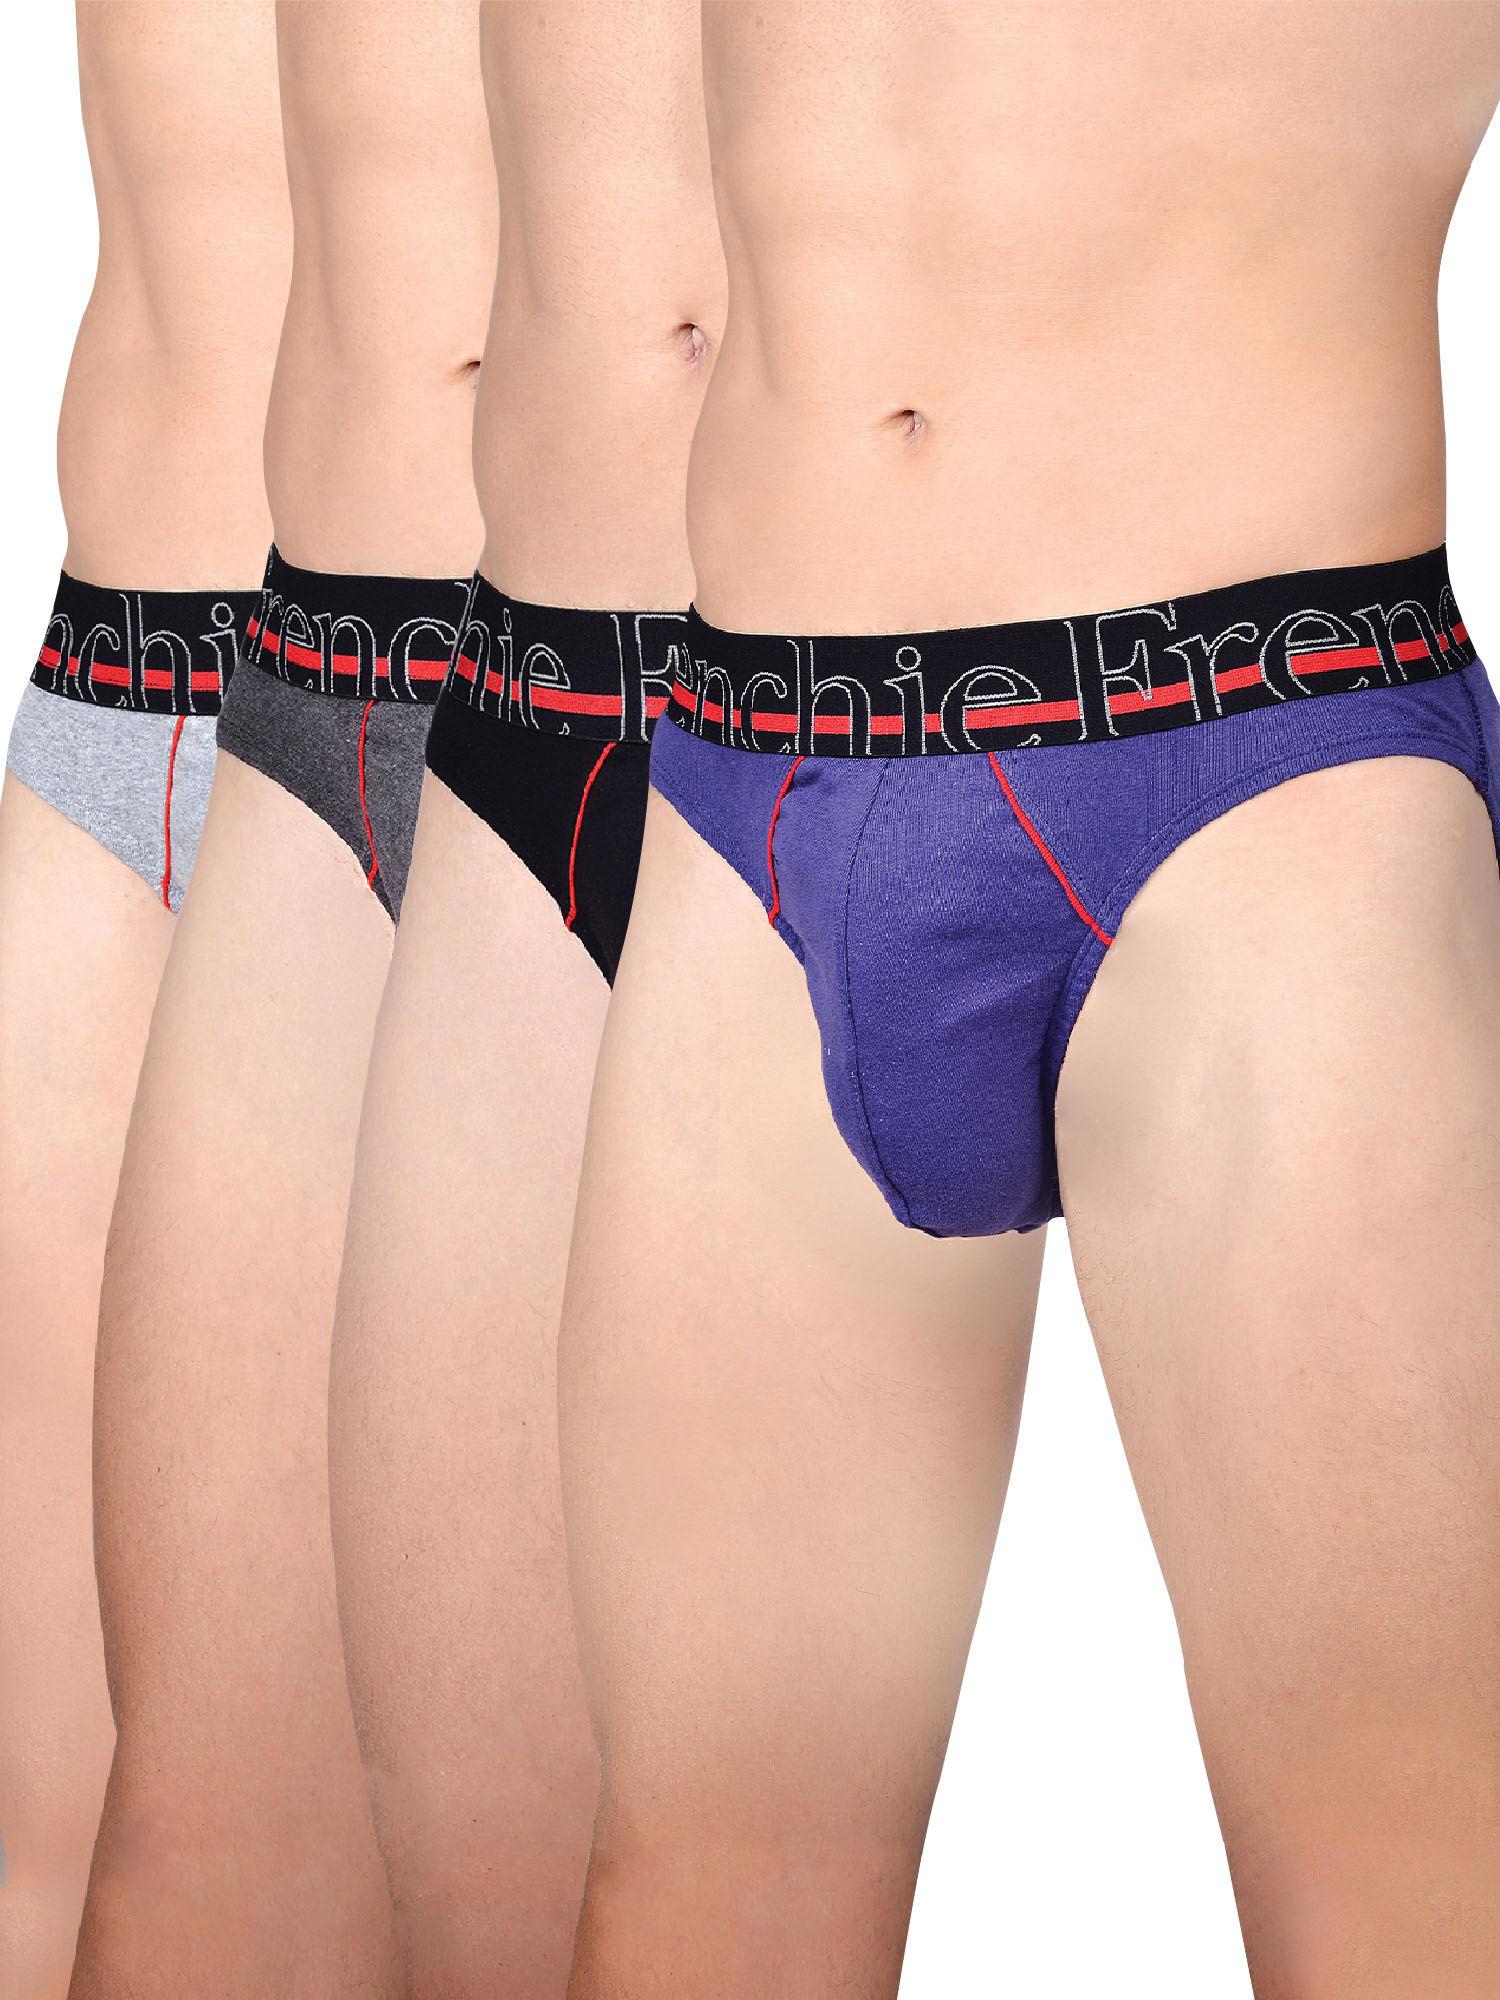 casuals-4002-mens-cotton-briefs-assorted-colours-(pack-of-4)